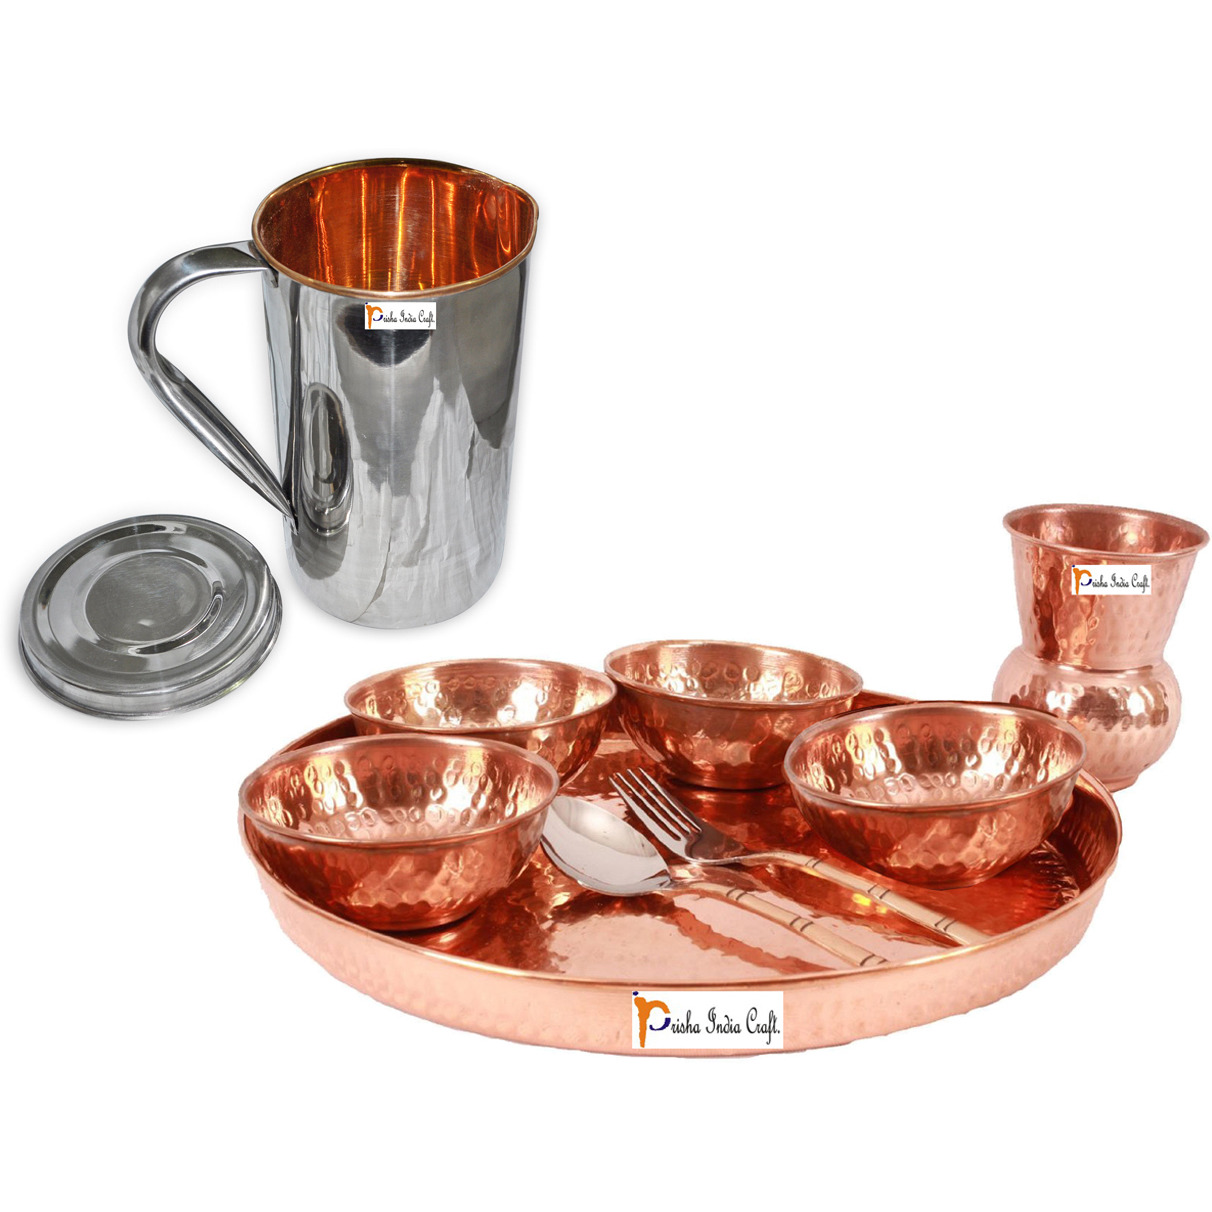 Prisha India Craft B. Dinnerware Traditional 100% Pure Copper Dinner Set of Thali Plate, Bowls, Glass and Spoon, Dia 12  With 1 Stainless Steel Copper Pitcher Jug - Christmas Gift